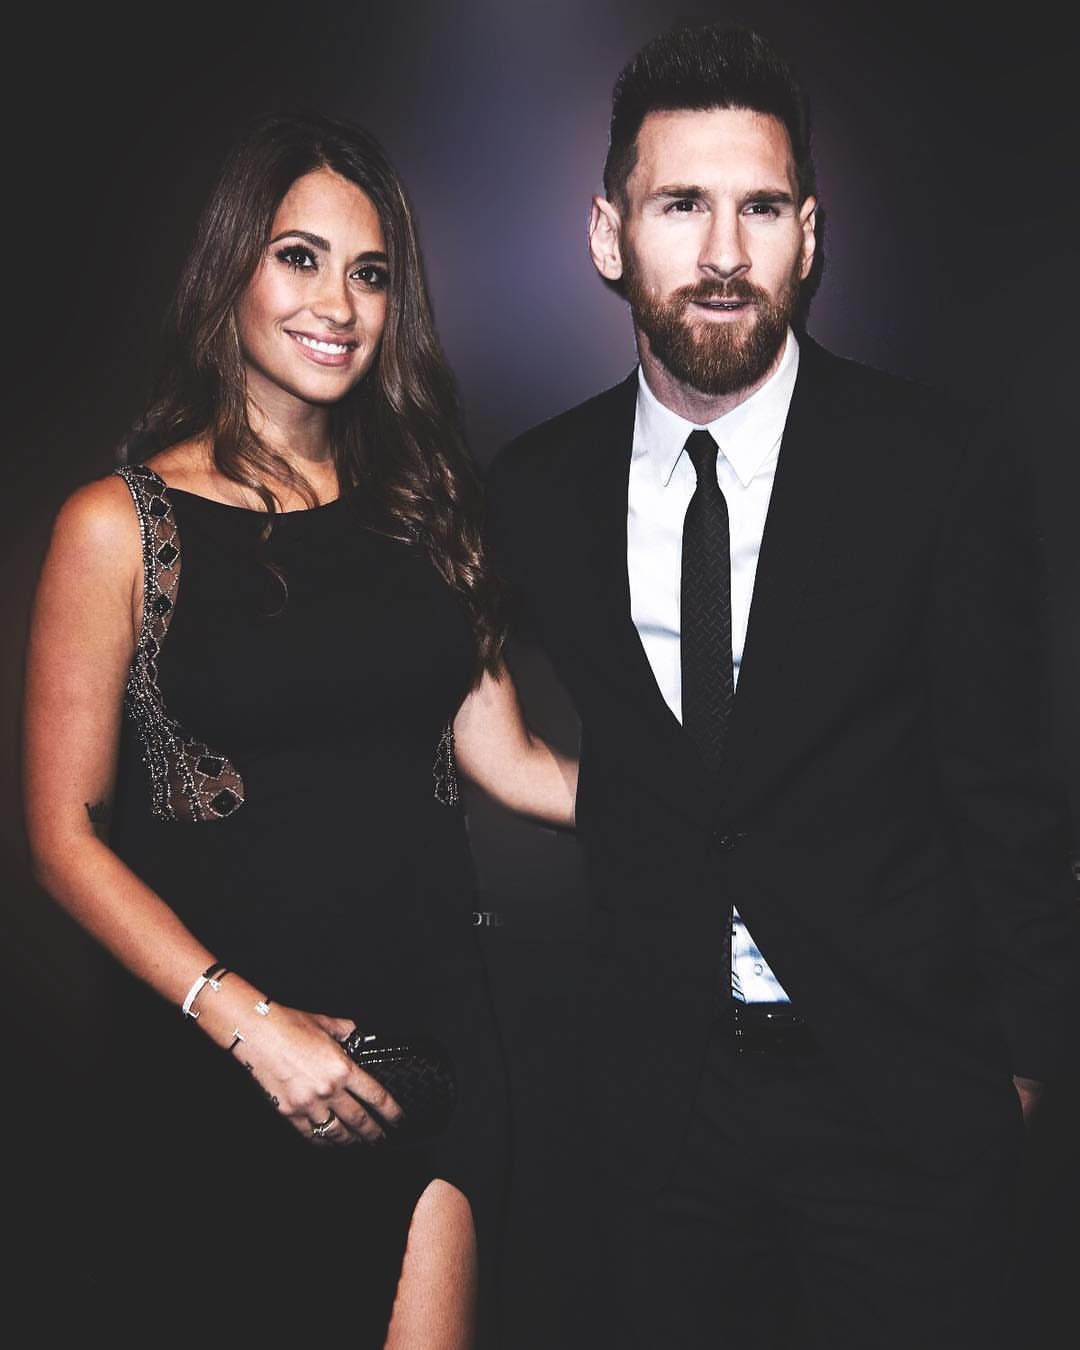 Messi And Wife Wallpapers - Wallpaper Cave